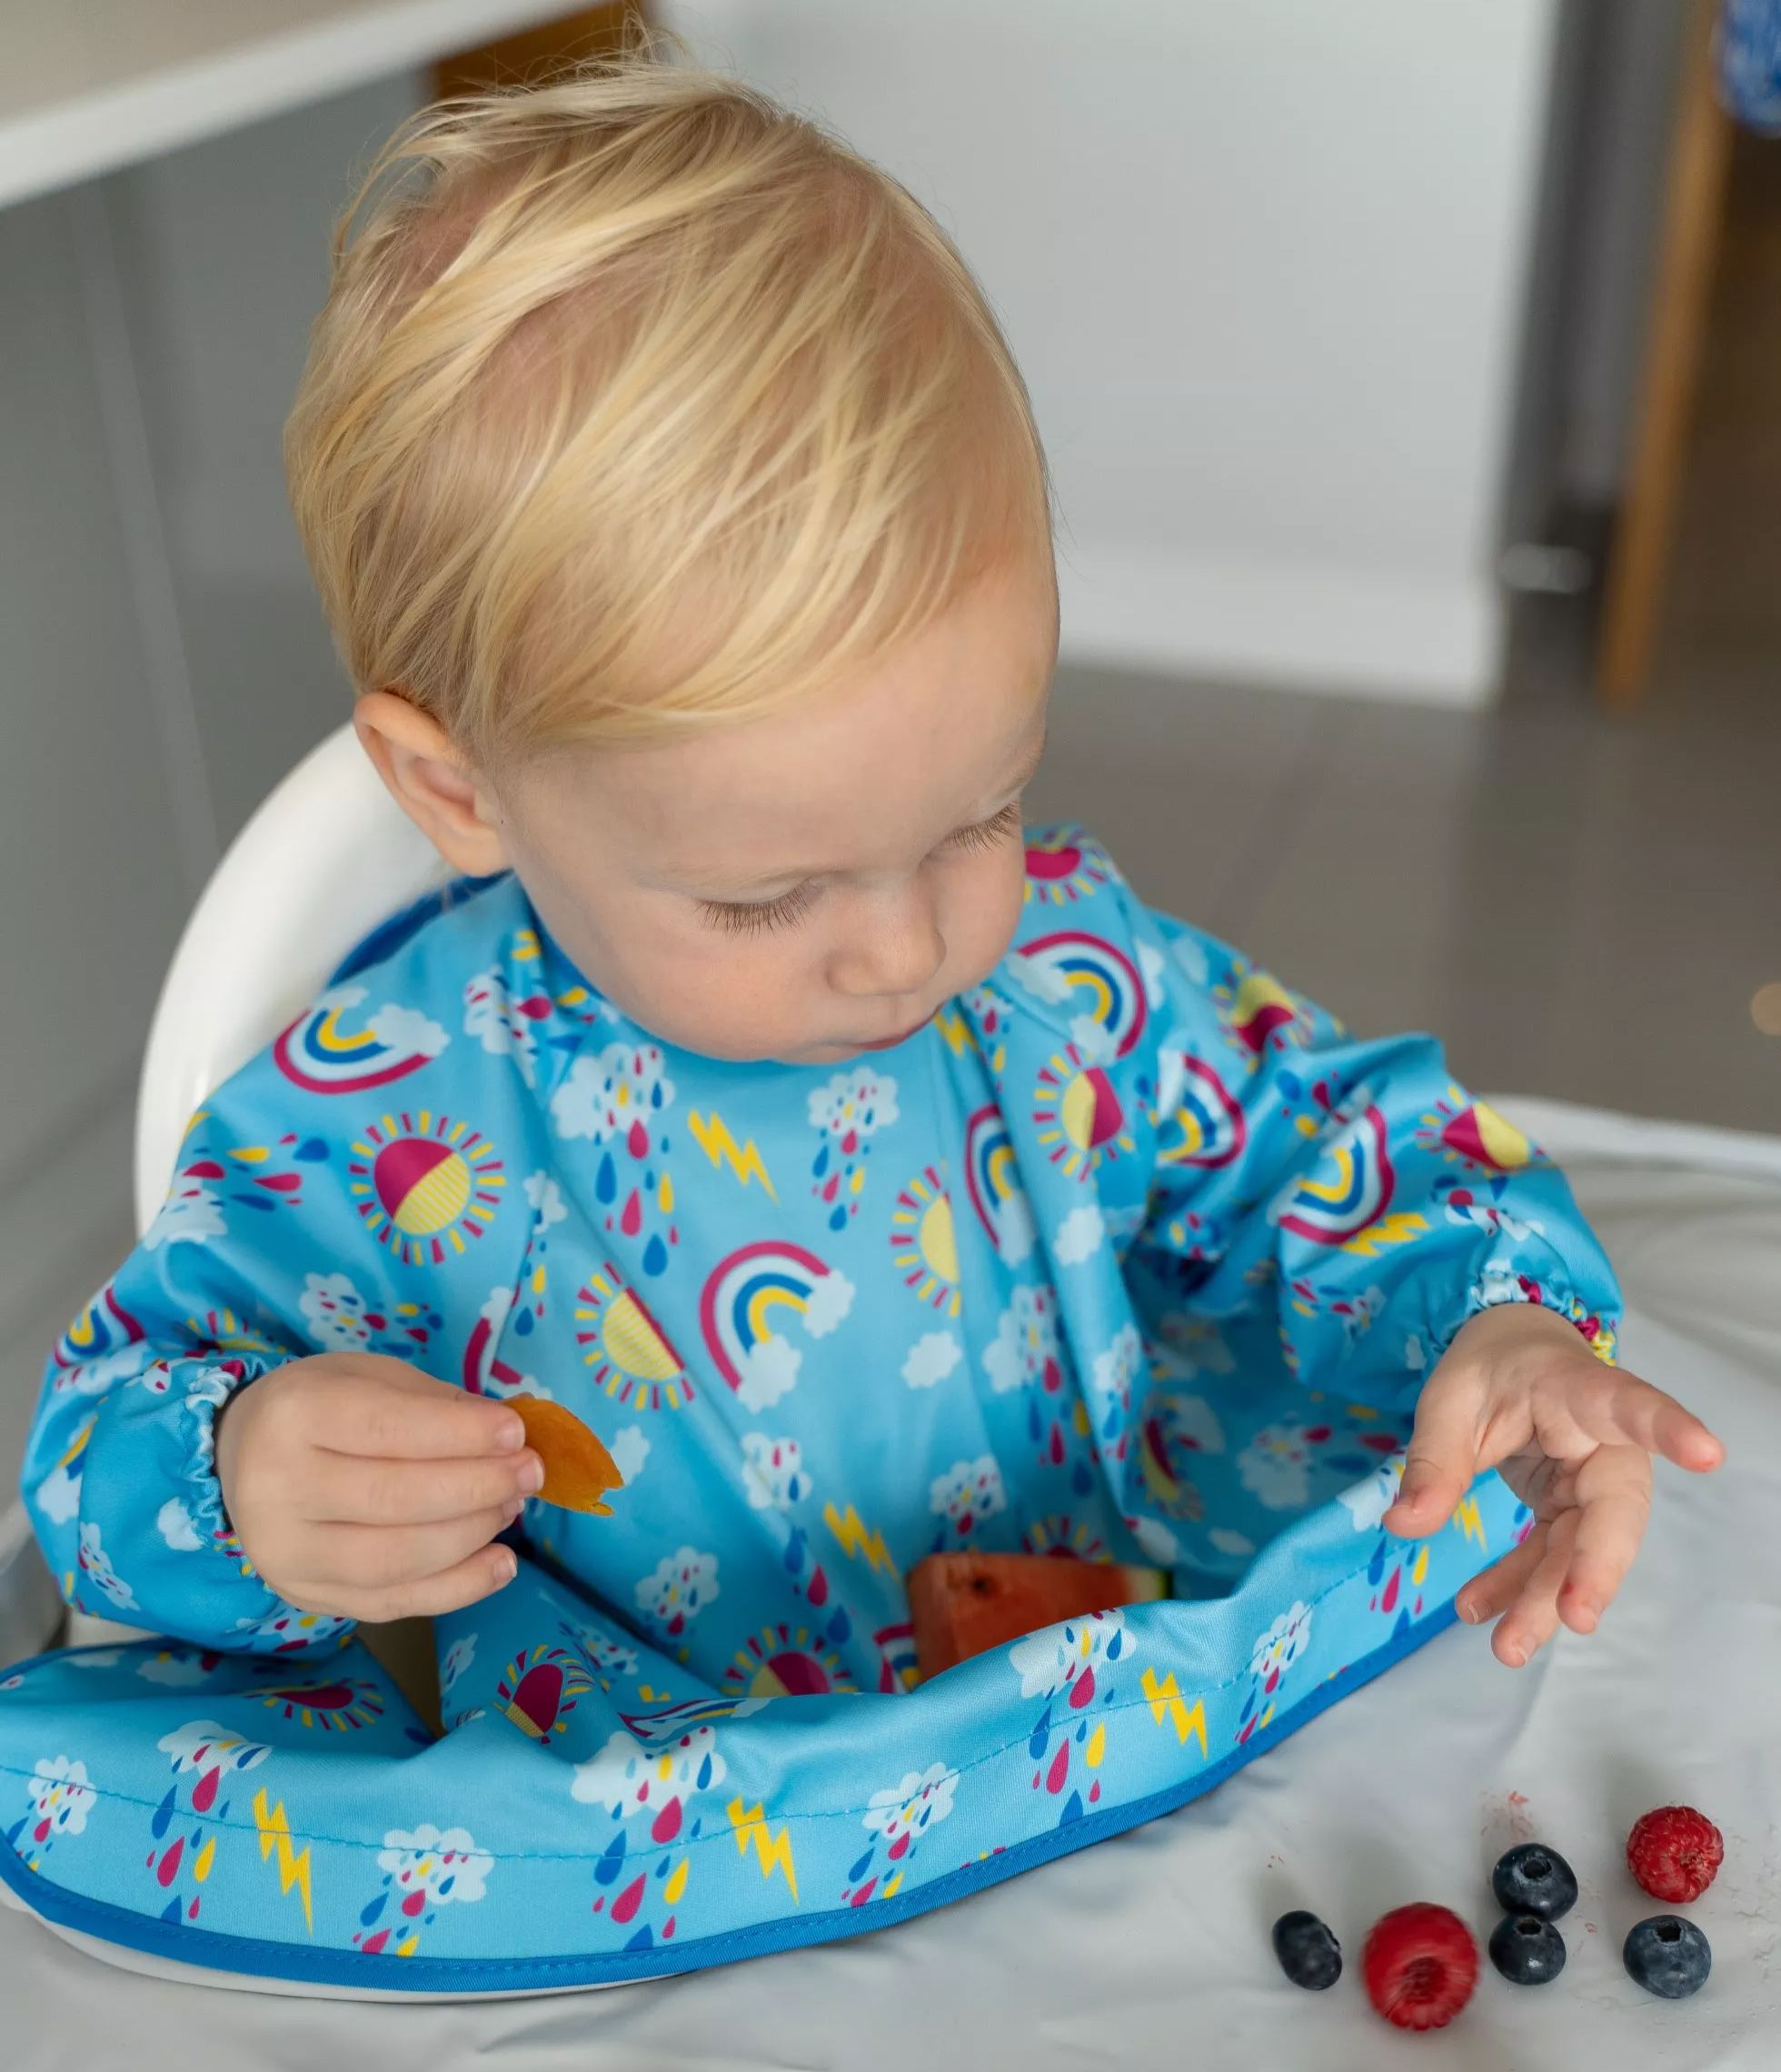 Additional Bib for For Tidy Tot Bib and Tray Weaning Kit Baby Led Weaning Mealtime